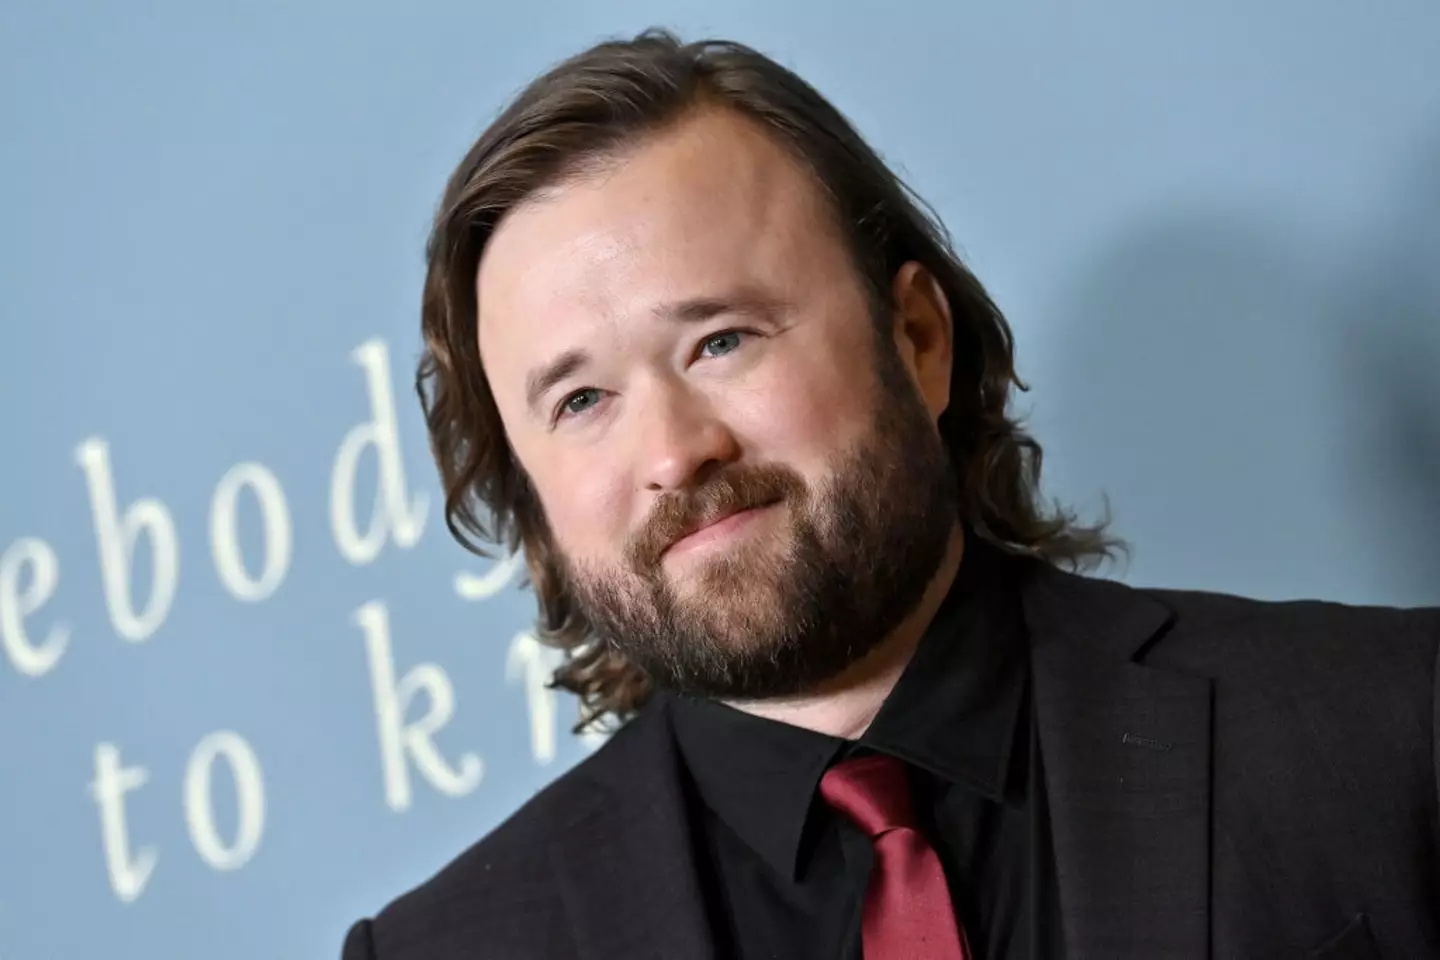 Fans think Lamar meant to refer to former child star Haley Joel Osment from The Sixth Sense.(Axelle/Bauer-Griffin/FilmMagic)